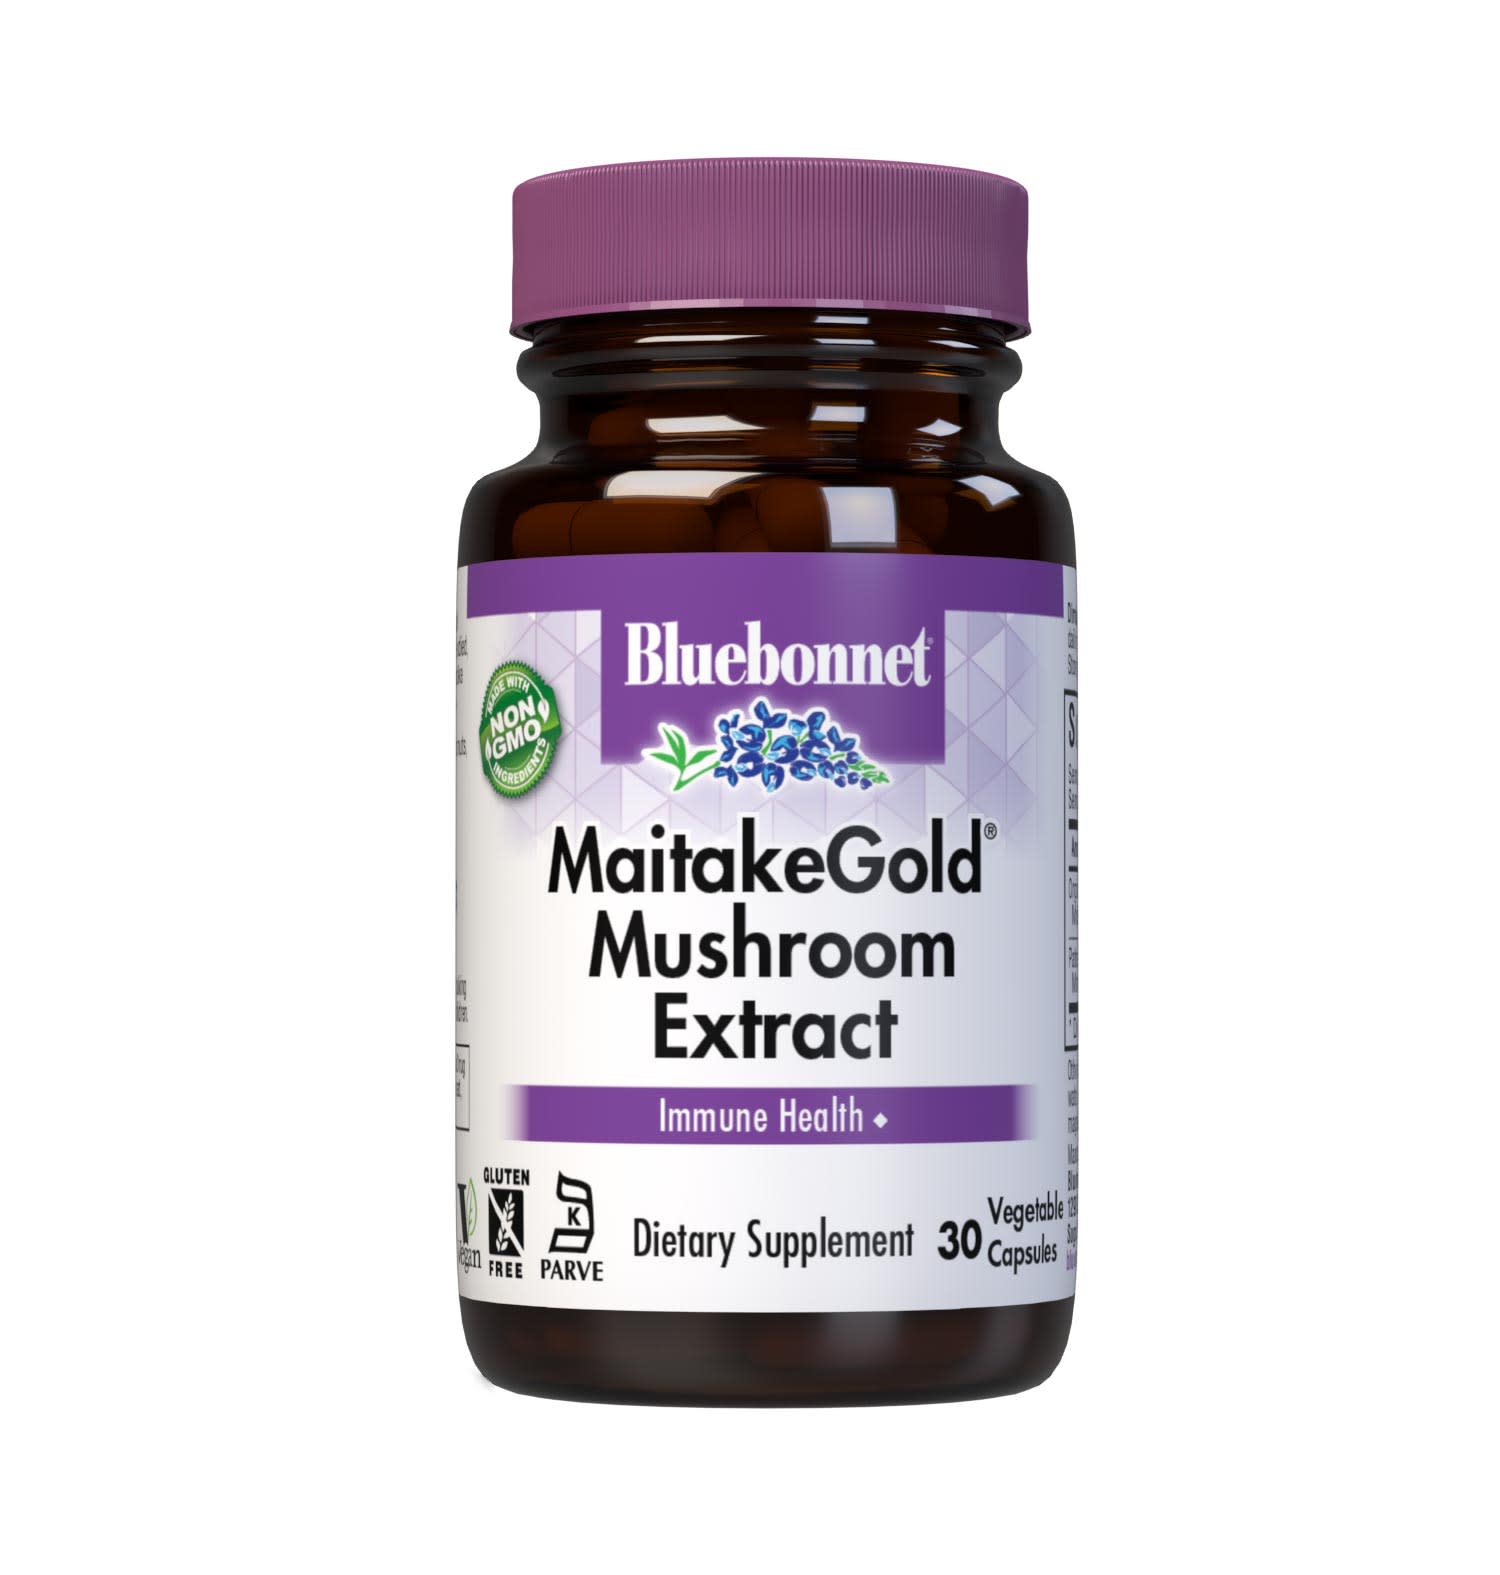 Bluebonnet’s MaitakeGold Mushroom Extract 30 Vegetable Capsules have been expertly formulated with a combination of clinically studied, patented MaitakeGold 404 extract with organic whole maitake mycelia grown on brown rice to support immune health.  #size_30 count